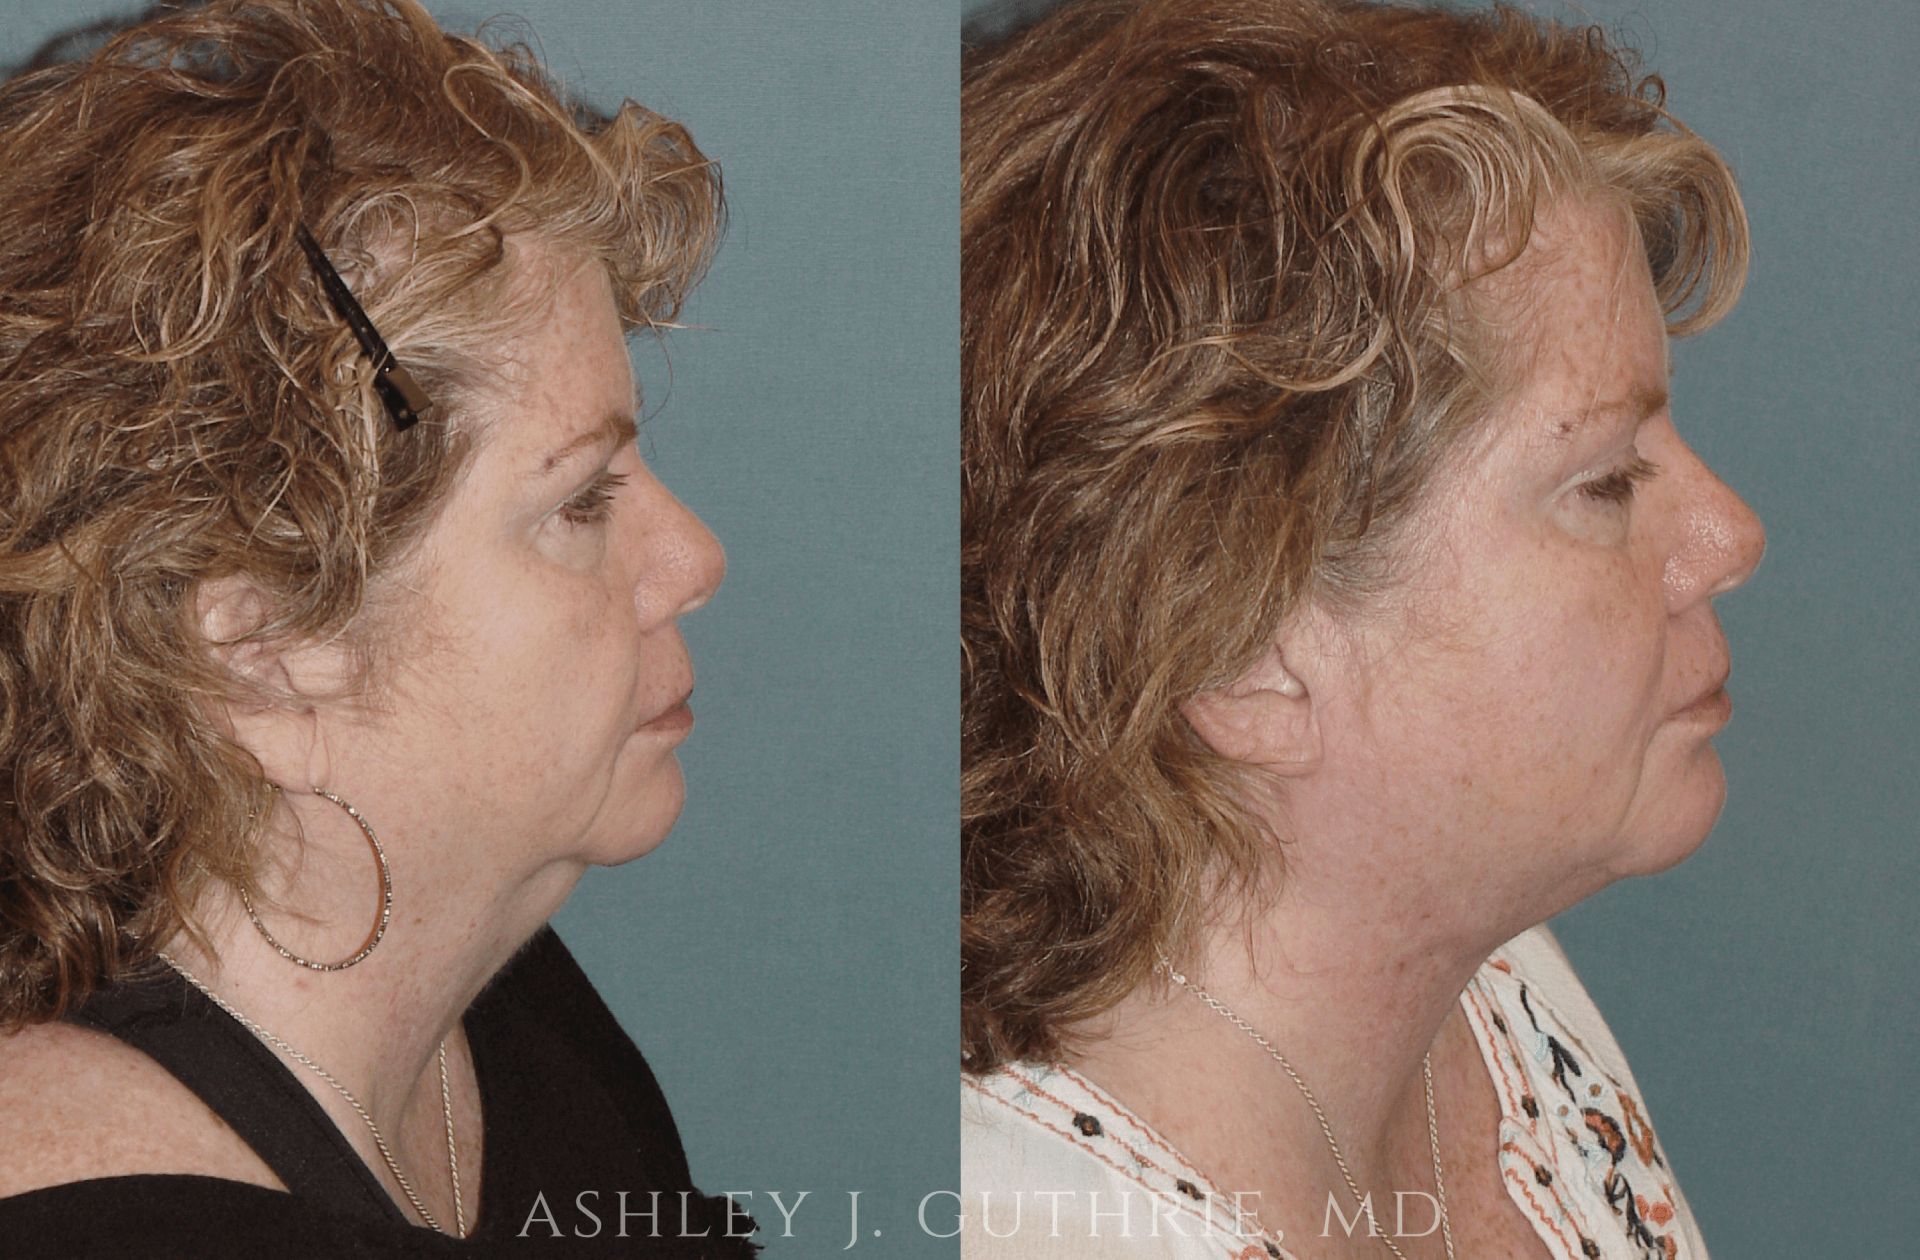 female patient before and after Direct Submental Cervicoplasty and Chin Implant procedures by Dr. Guthrie